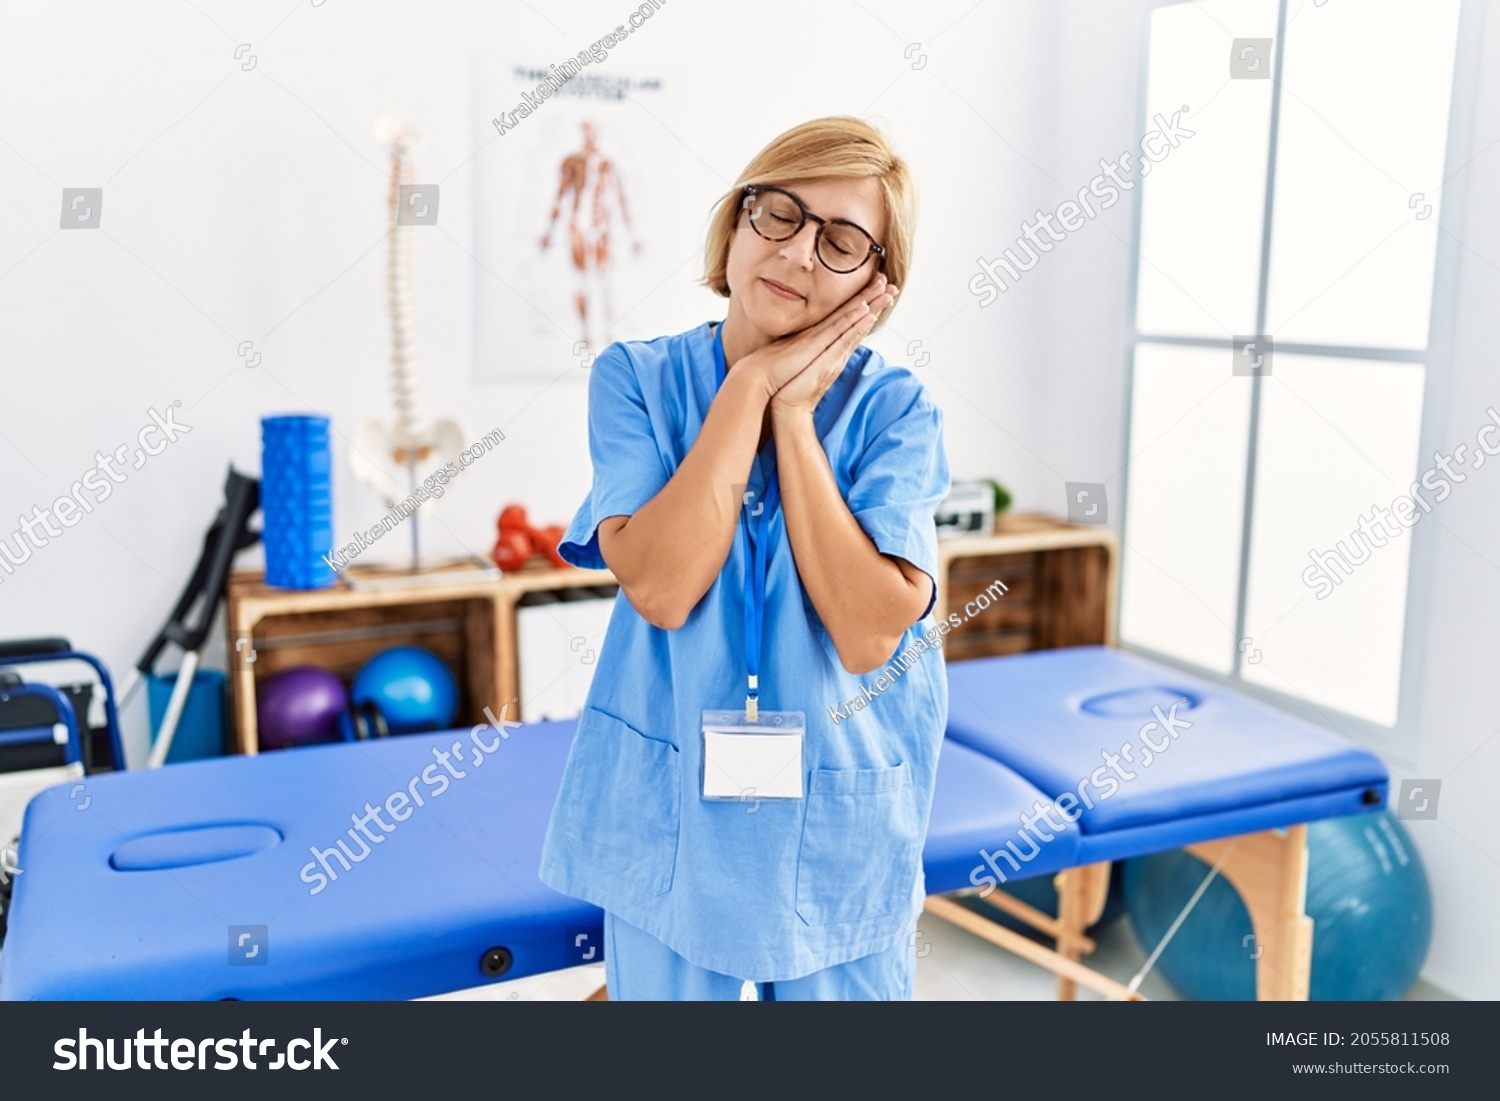 Middle age blonde woman working at pain recovery clinic sleeping tired dreaming and posing with hands together while smiling with closed eyes.  #2055811508